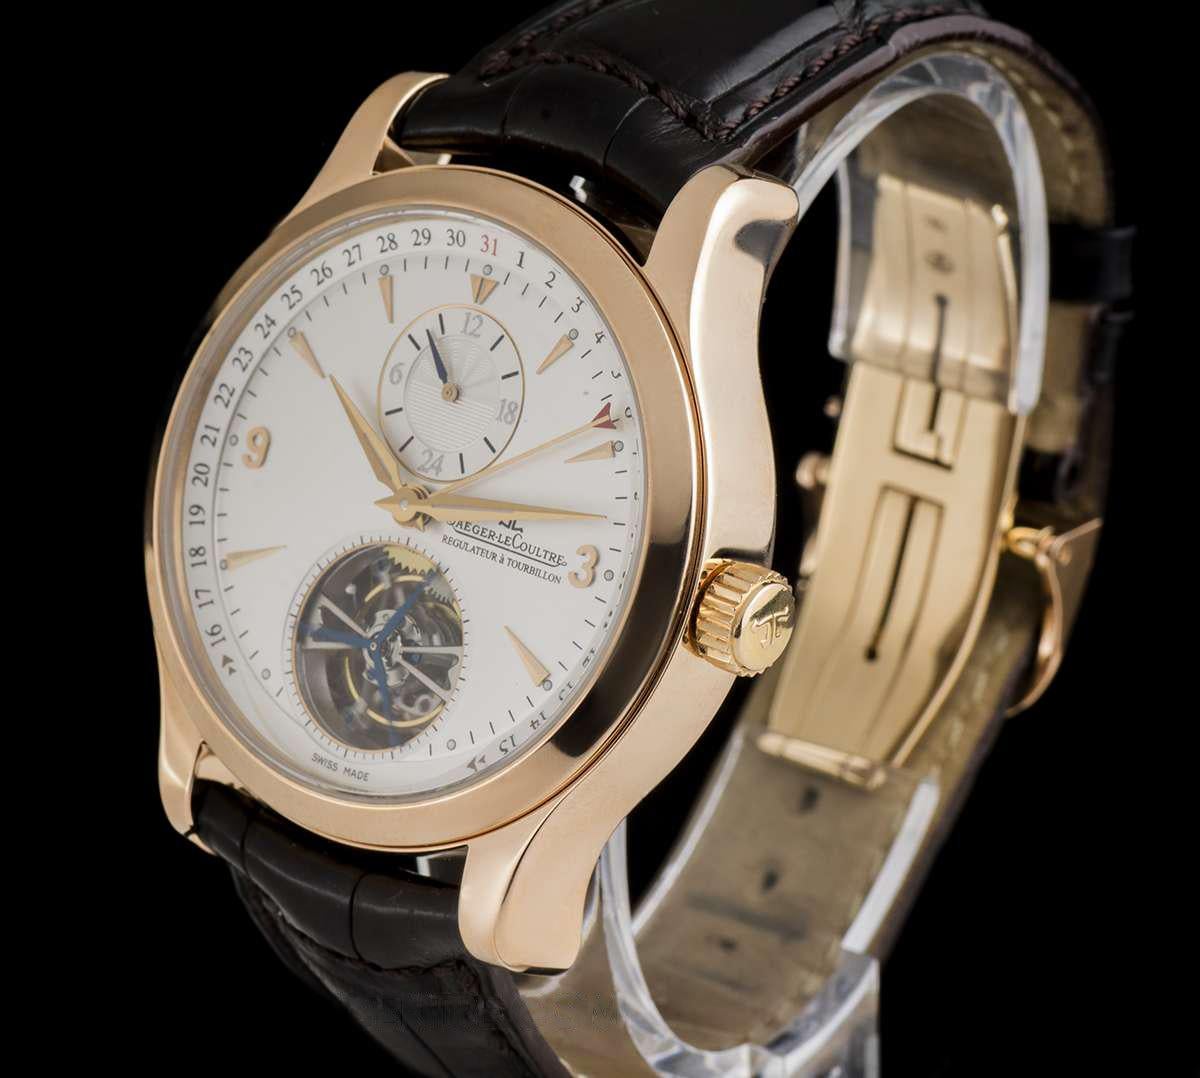 A 42 mm 18k Rose Gold Master Tourbillon Gents Wristwatch, silver dial with applied hour markers and applied arabic numbers 3 and 9, outer date ring with central hand, second time zone at 12 0'clock, a fixed 18k rose gold polished bezel, an original